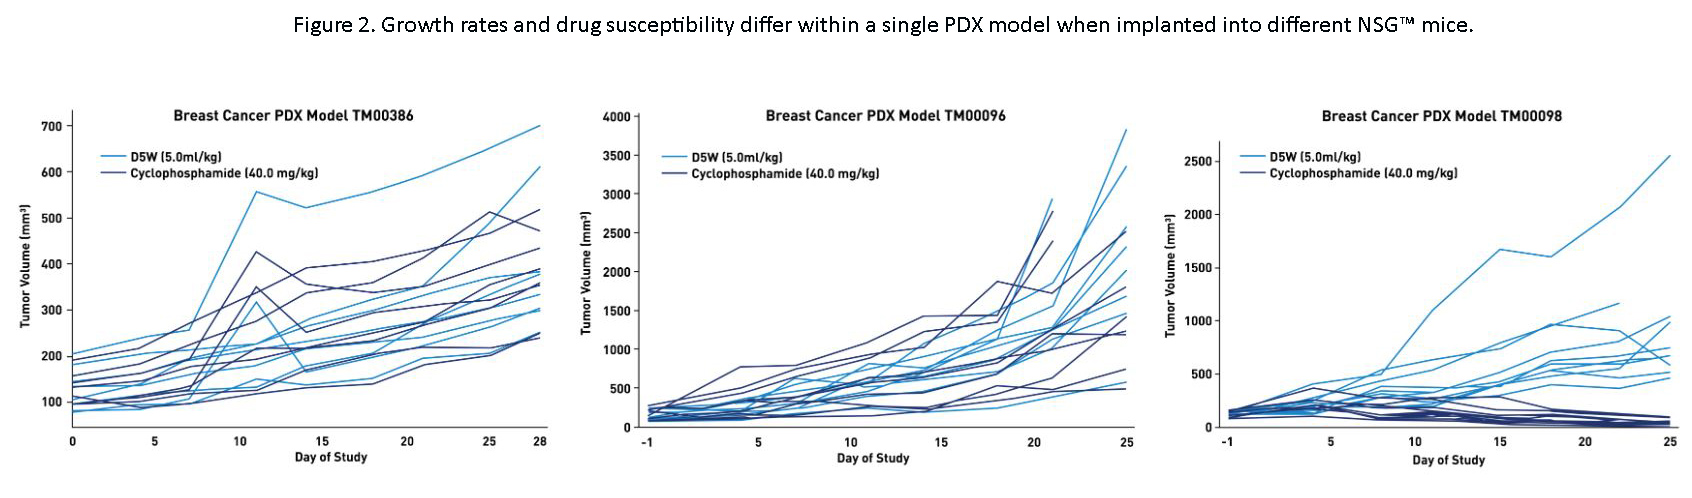 Figure 2. Growth rates and drug susceptibility differ within a single PDX model when implanted into different NSG™ mice.